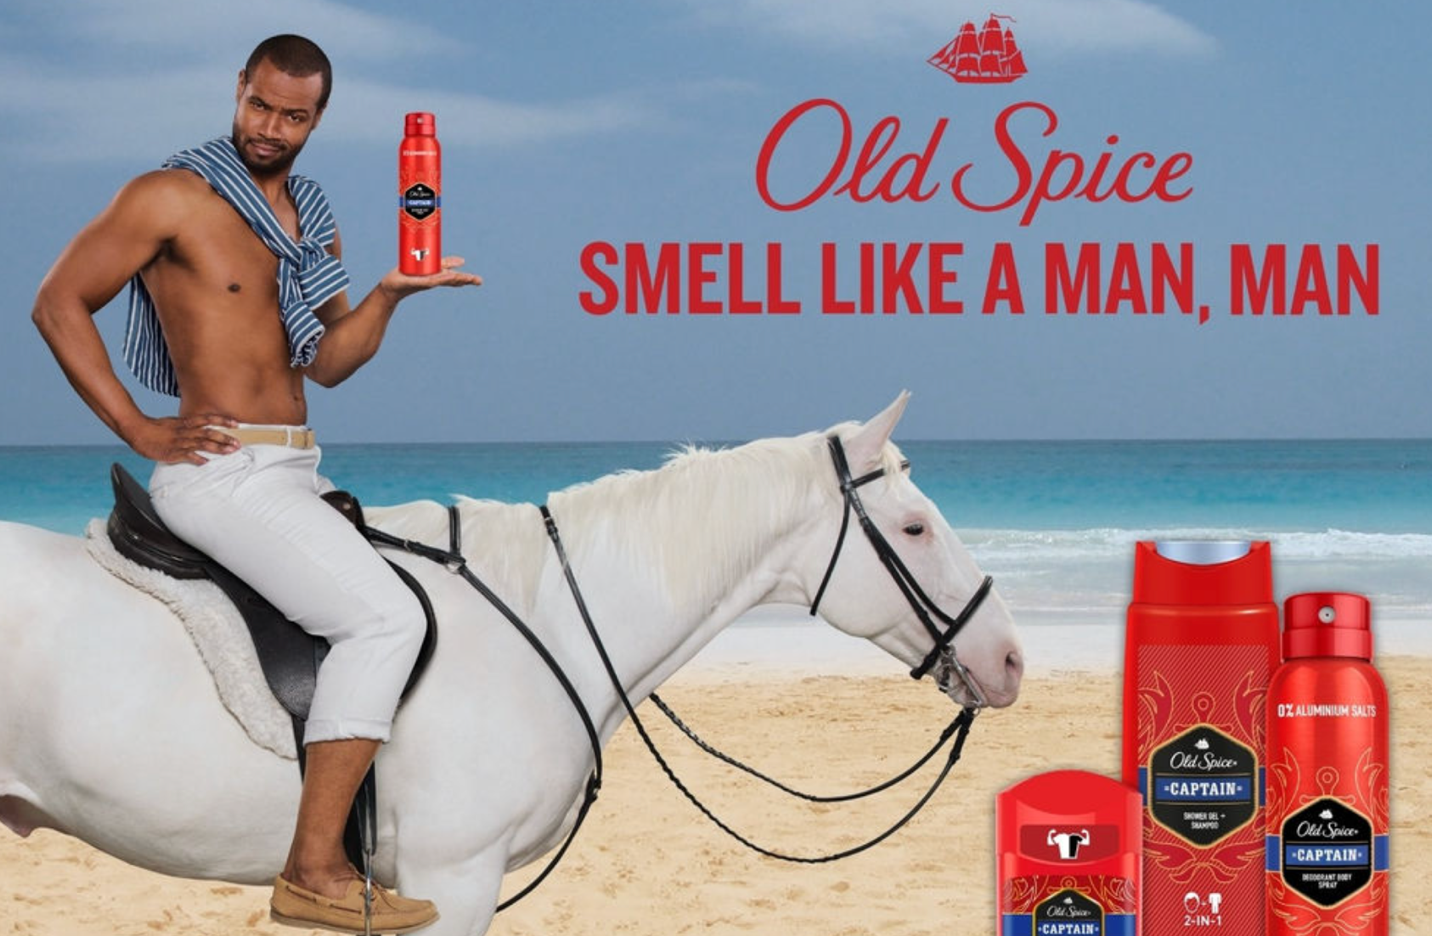 Old spice ad copy example